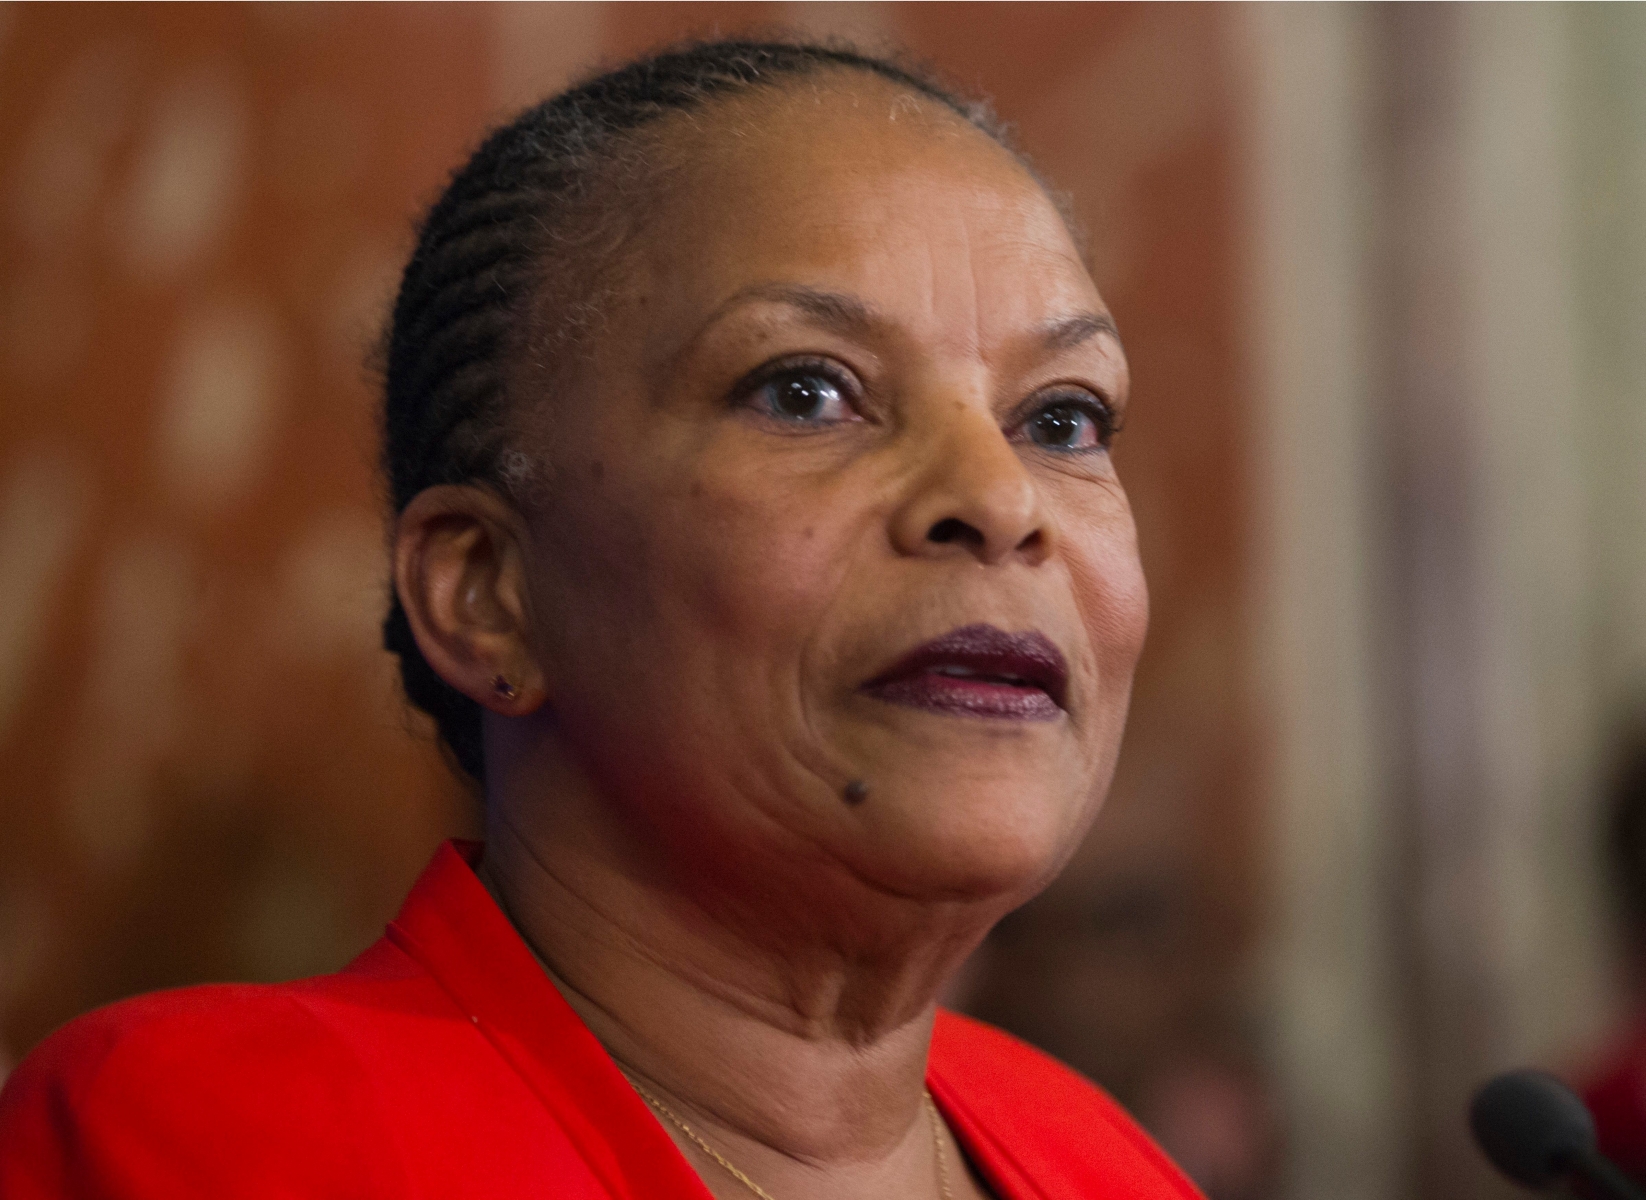 French outgoing Justice Minister Christiane Taubira speaks as she leaves the French Justice Ministry in Paris Wednesday Jan. 27,2016. following the handover ceremony. Frances charismatic justice minister has resigned after objecting to the presidents push to revoke citizenship of convicted terrorists with dual nationality. President Francois Hollande announced Christiane Taubiras resignation  She is a devoted leftist best known for championing the legalization of gay marriage. Taubira is being replaced by Jean-Jacques Urvoas, a Socialist lawmaker from Brittany considered a specialist on security issues who is seen as close to Prime Minister Manuel Valls. (AP Photo/Jacques Brinon)  France Government